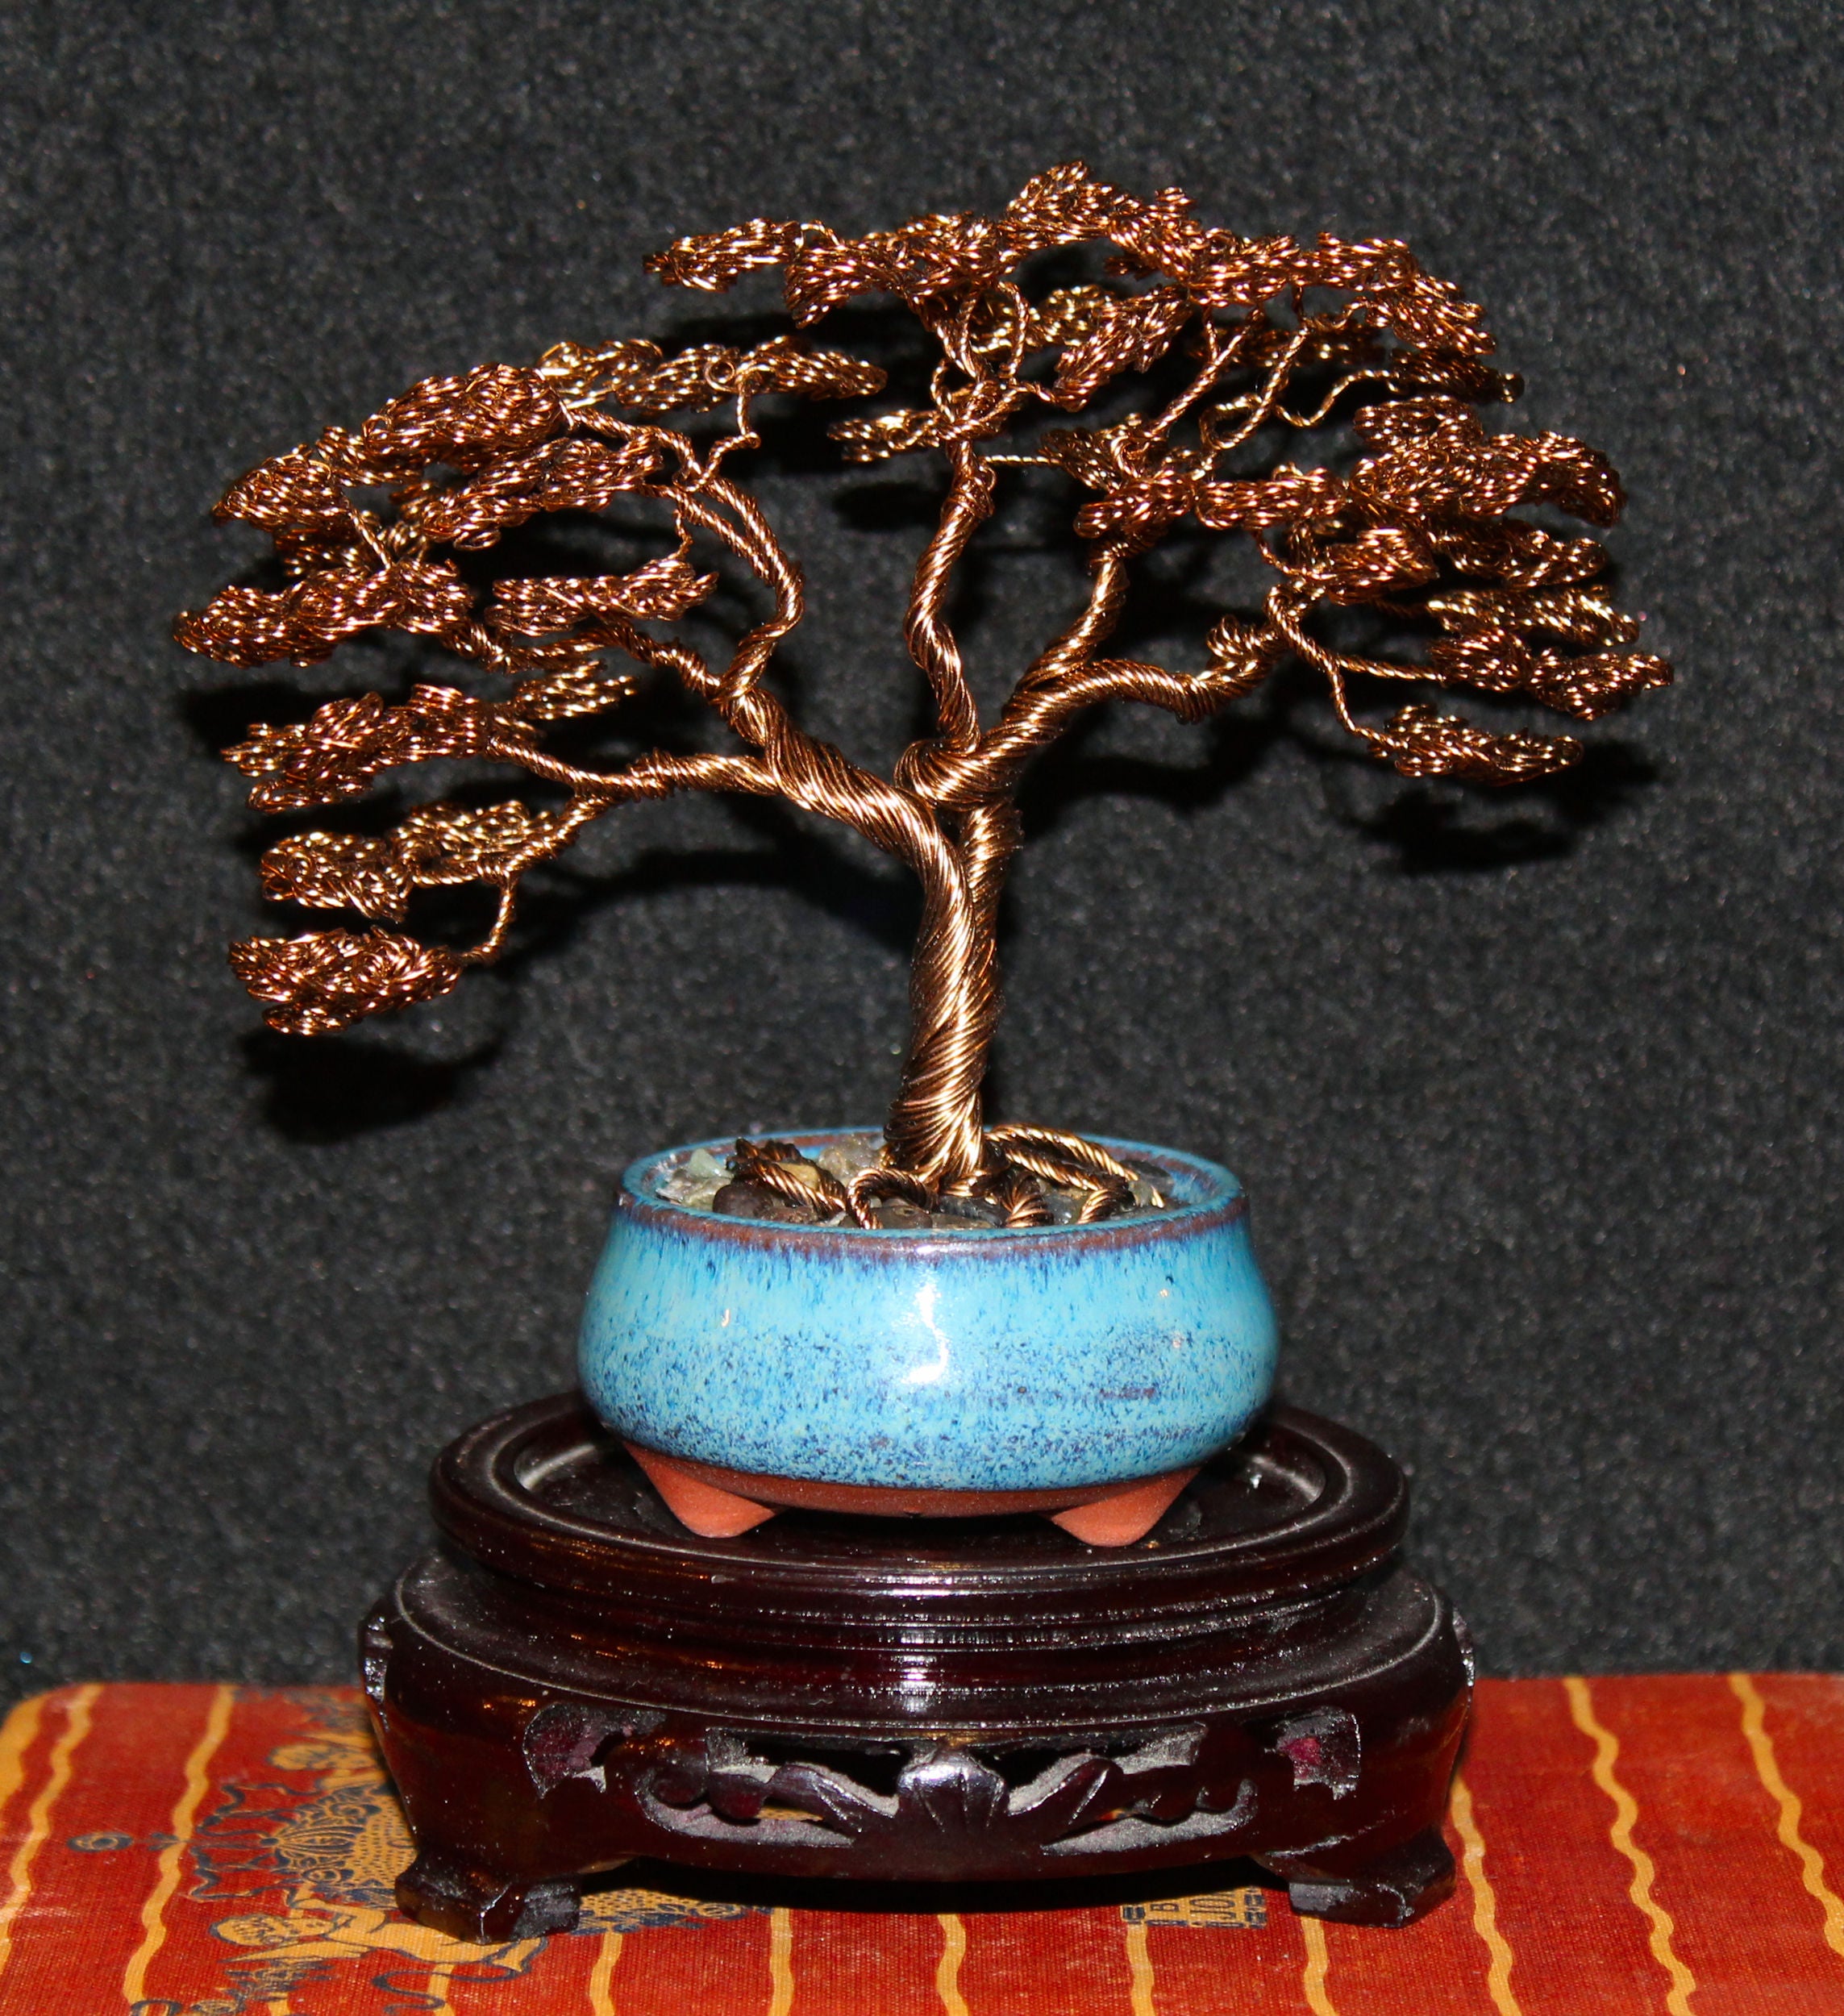 Antique Copper Upright Formal Bonsai with Exposed Roots - SOLD